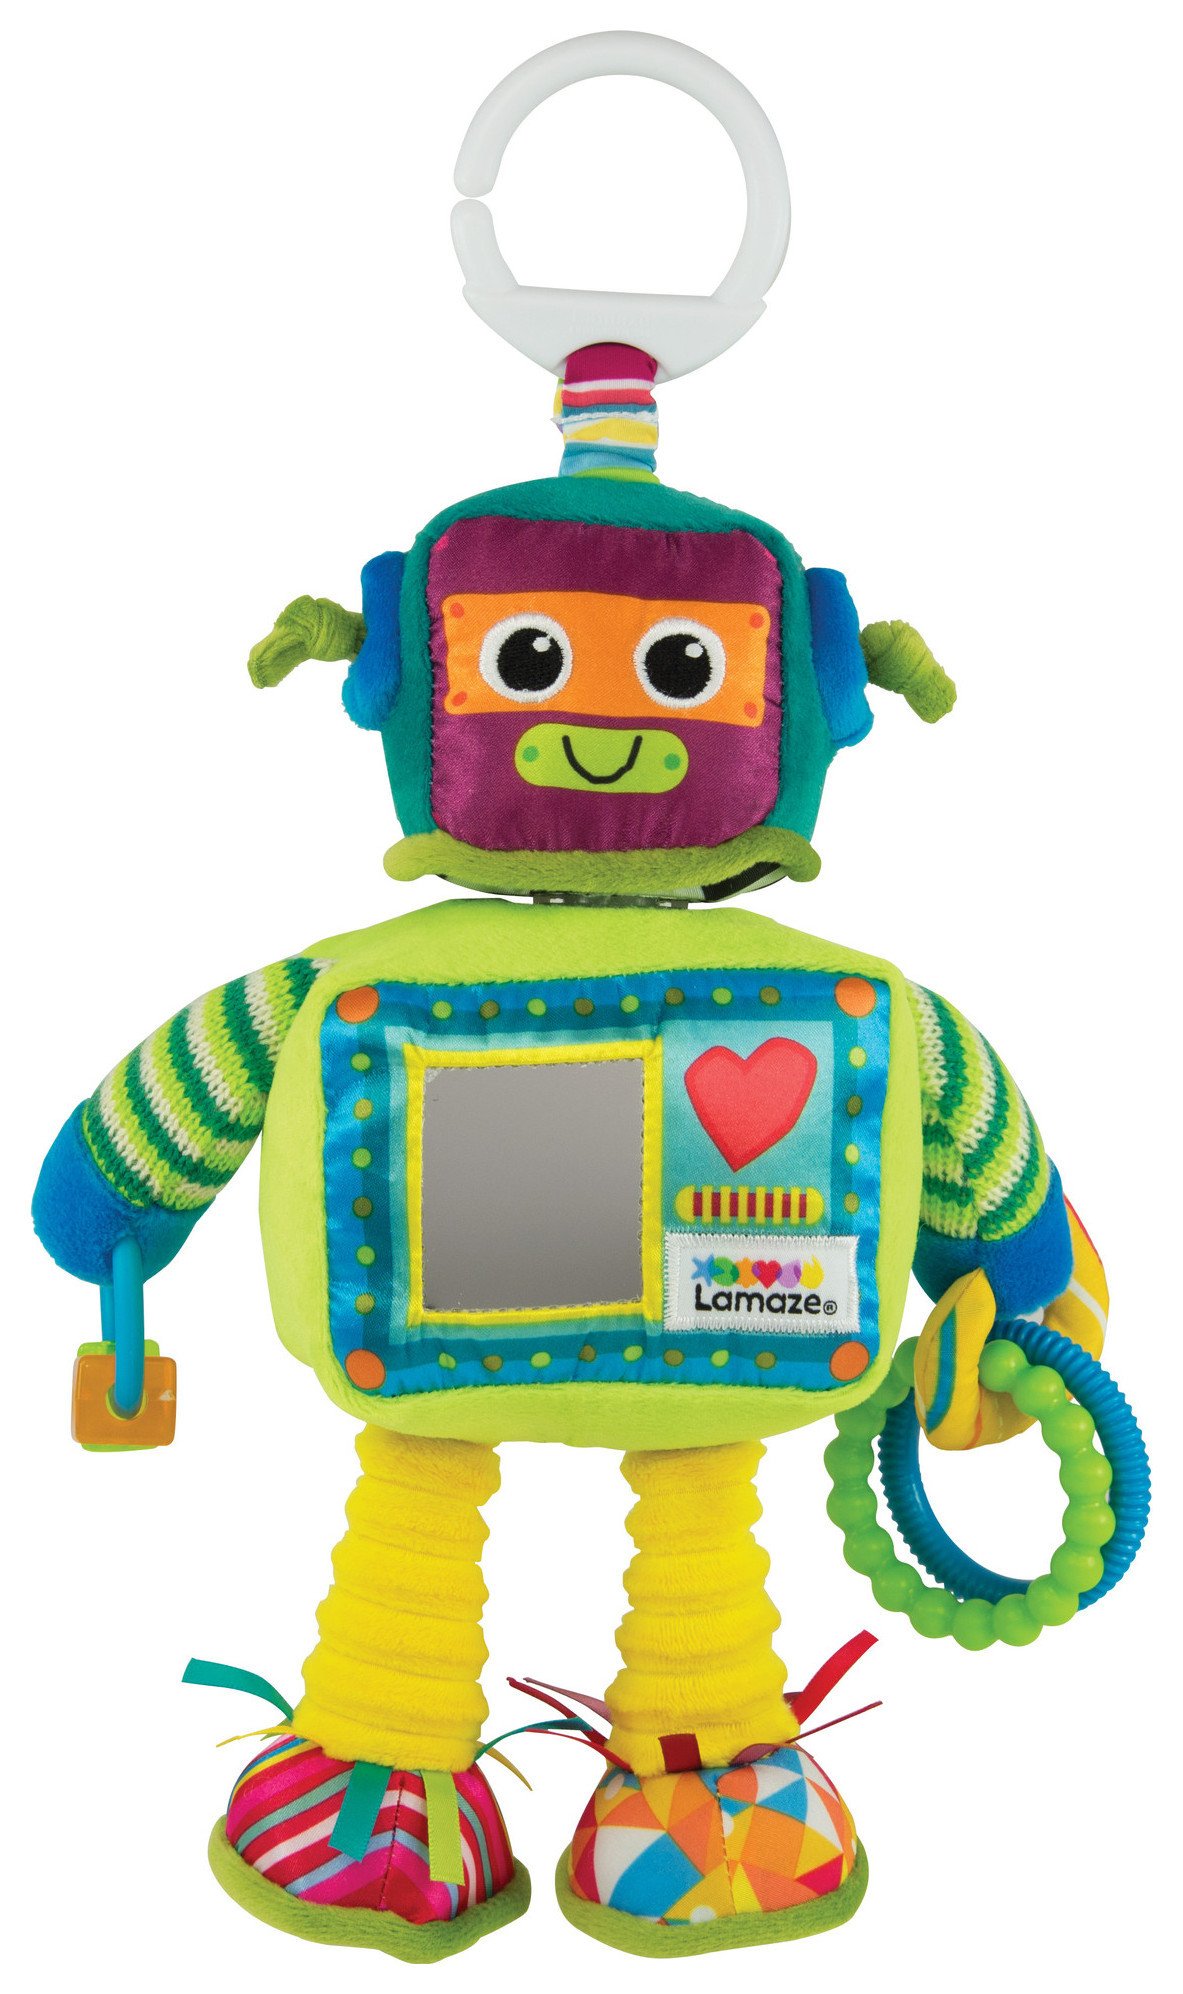 Tomy Lamaze Rusty the Robot. Review